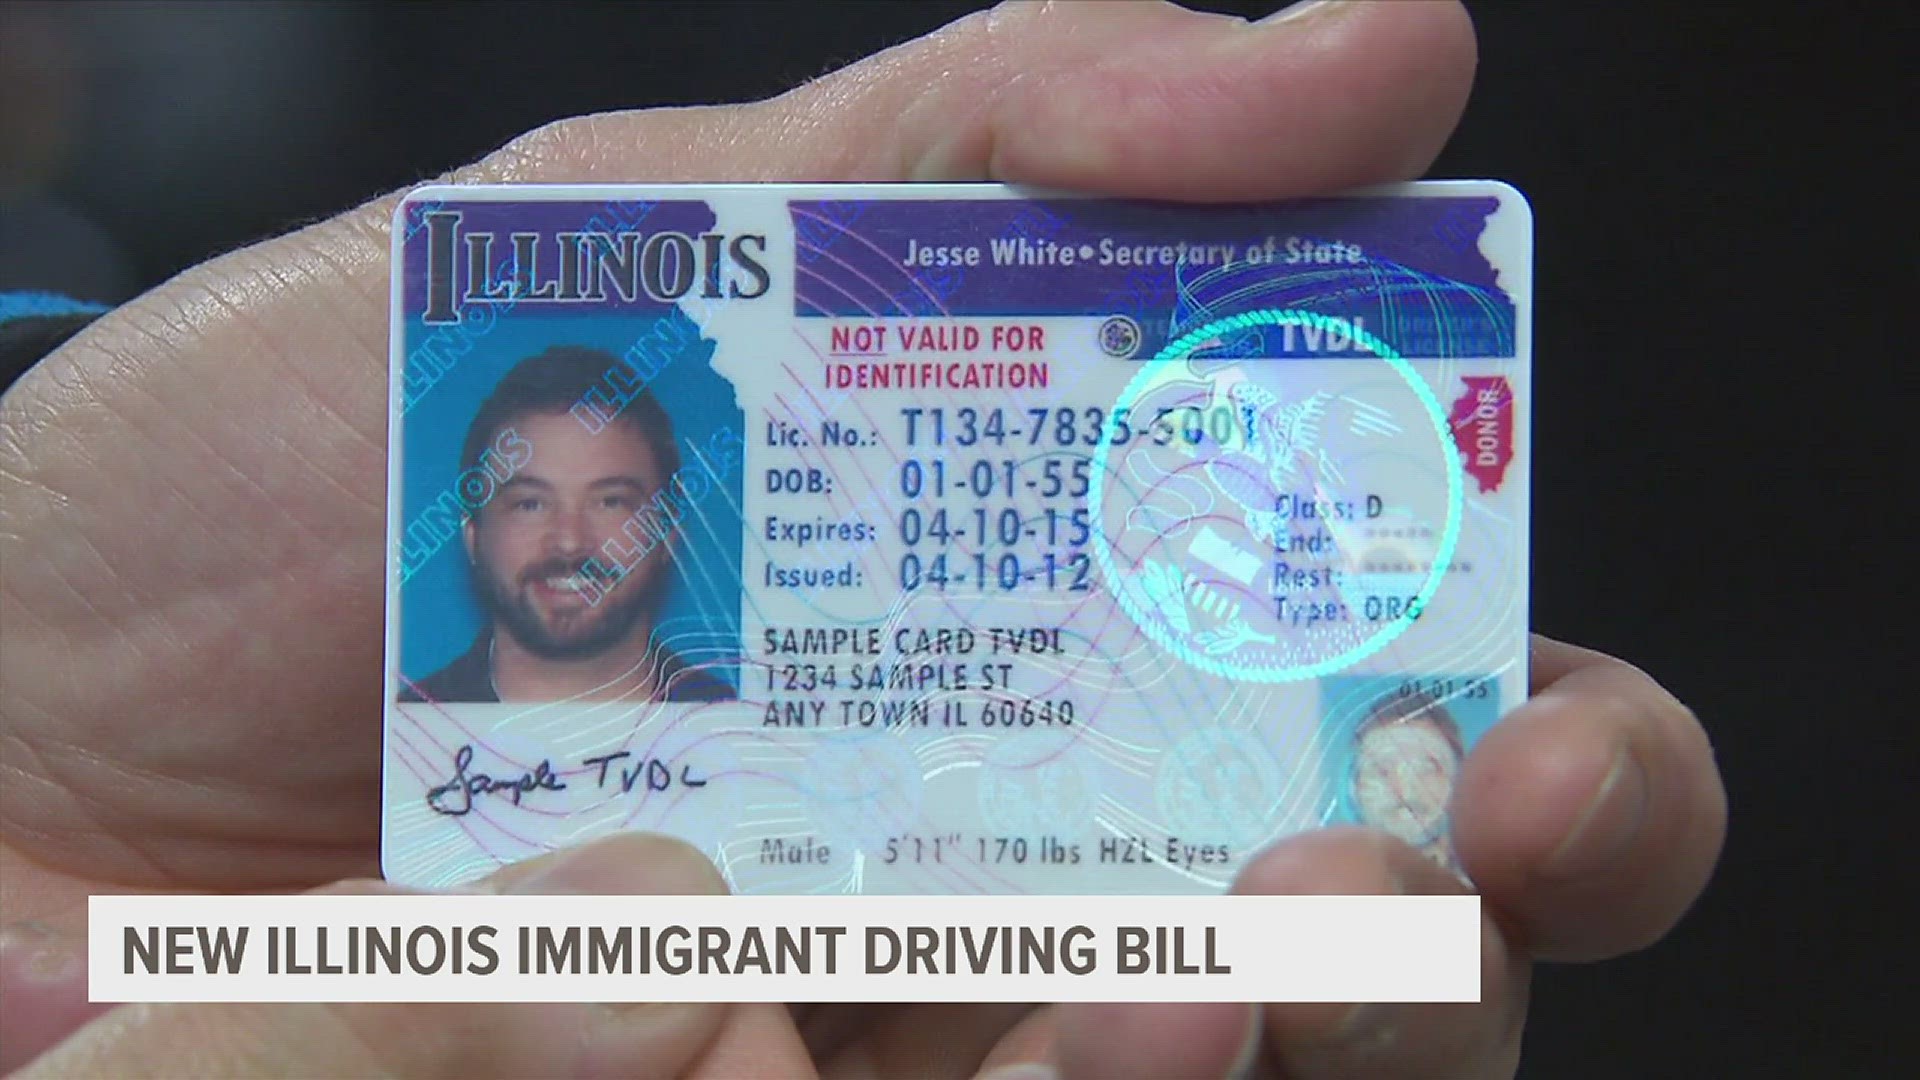 If the bill becomes law, immigrant driver's licenses in Illinois would read "Federal Limits Apply" instead of "Not Valid For Identification."